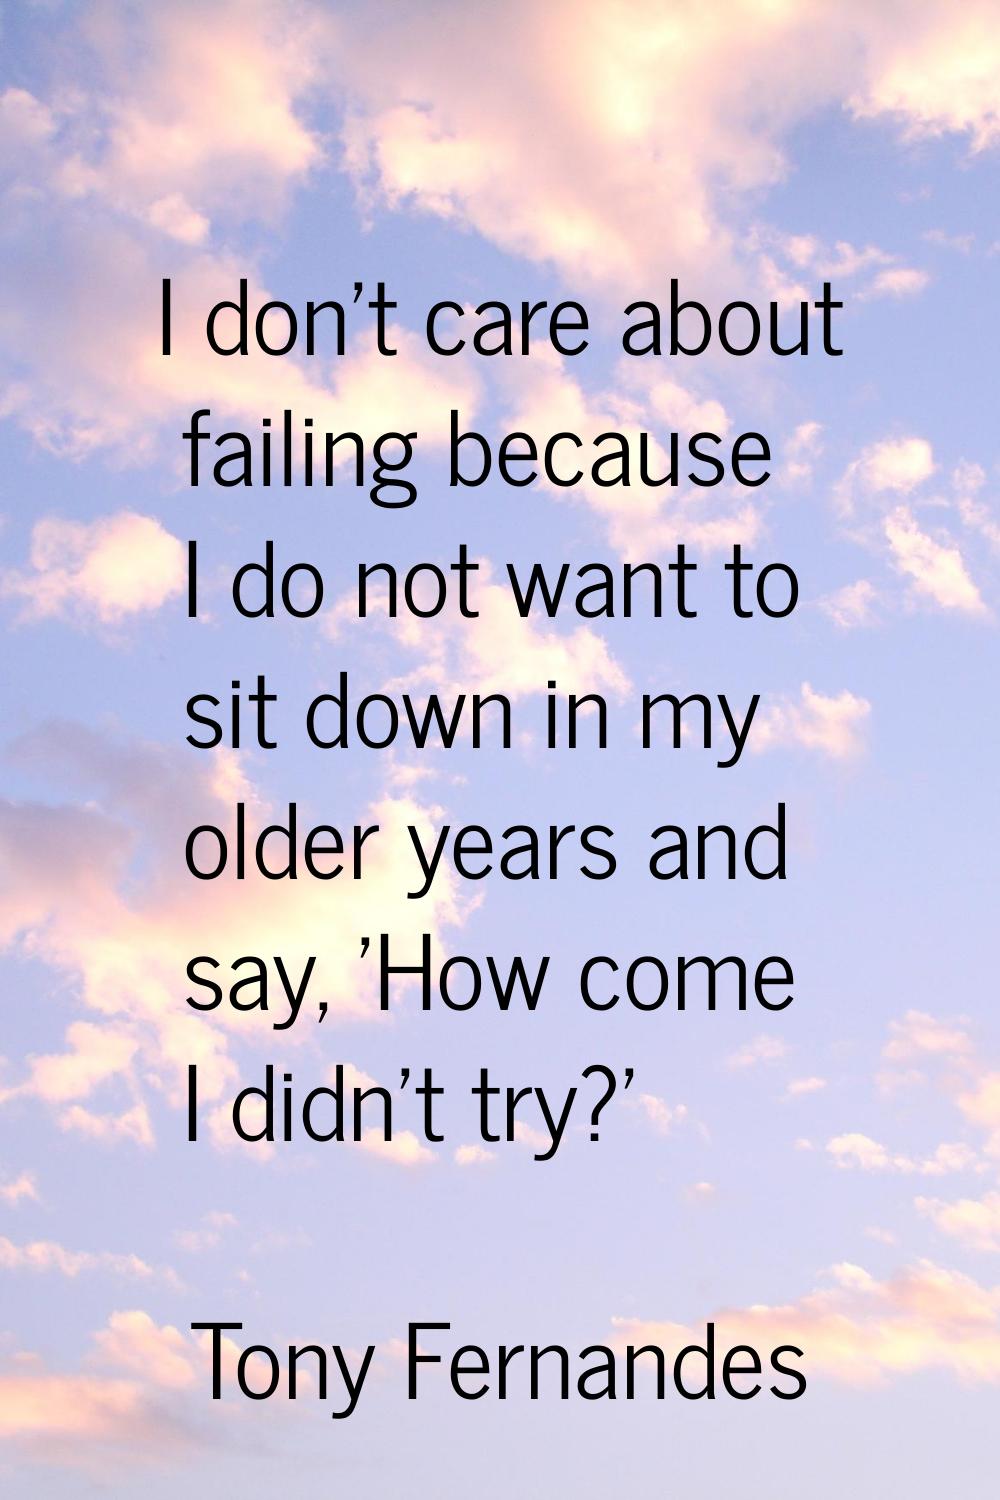 I don't care about failing because I do not want to sit down in my older years and say, 'How come I